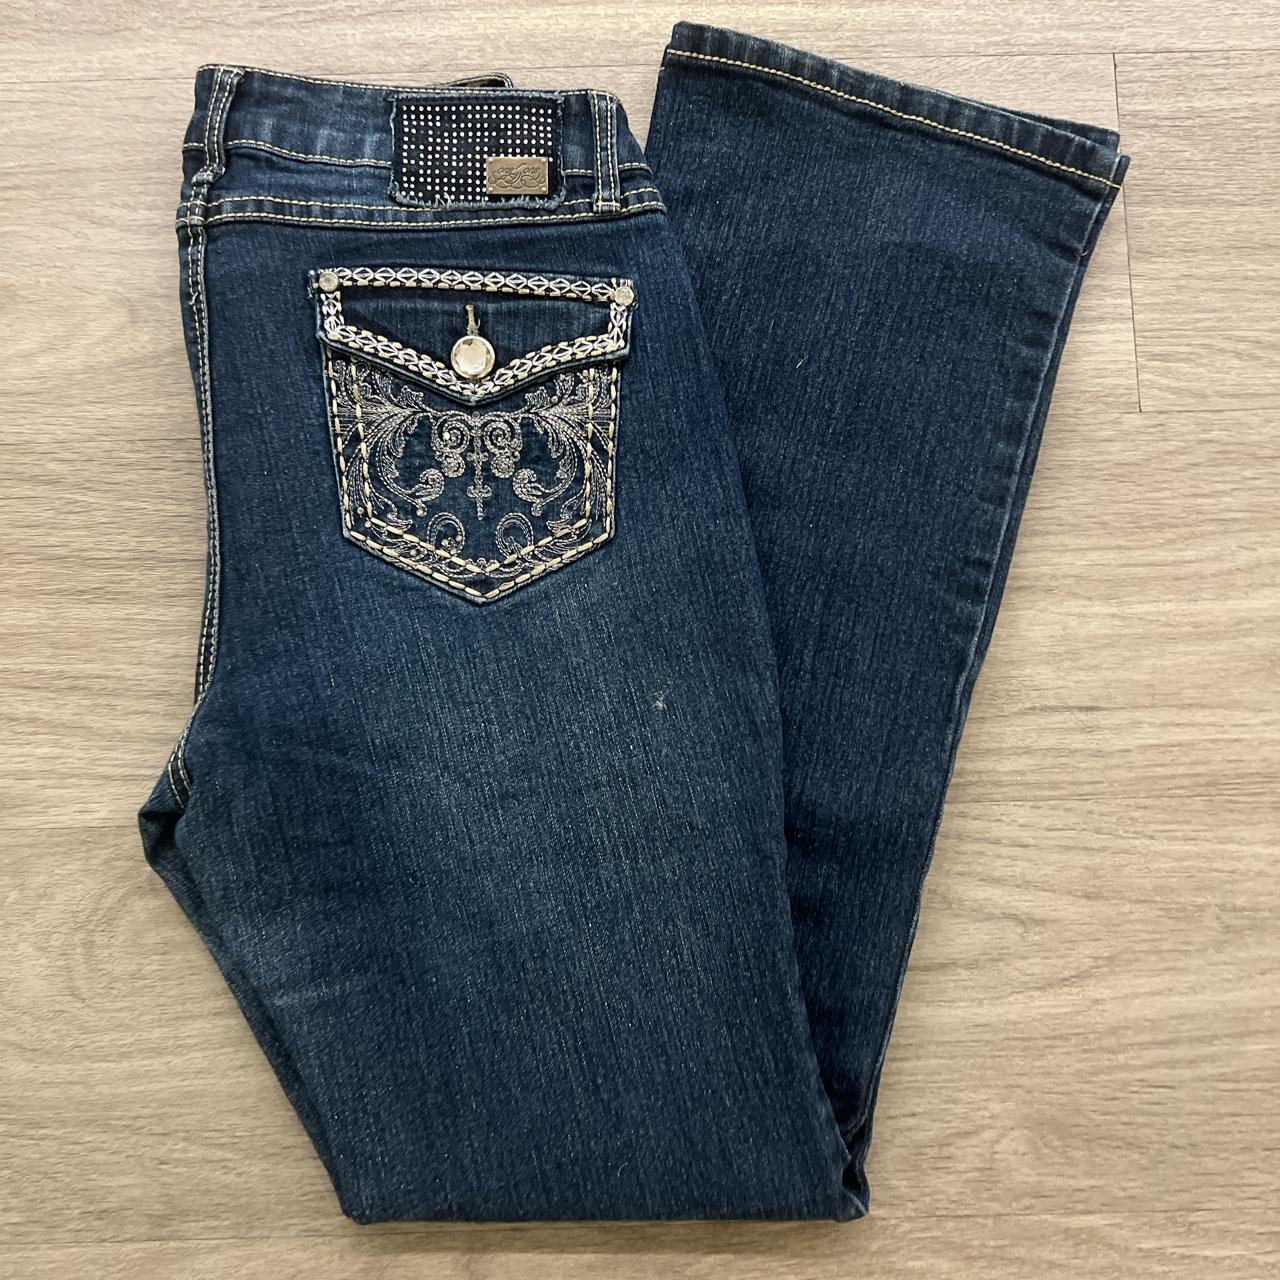 Rare One One Jeans☦️ Very Y2K 2000s like Women’s... - Depop